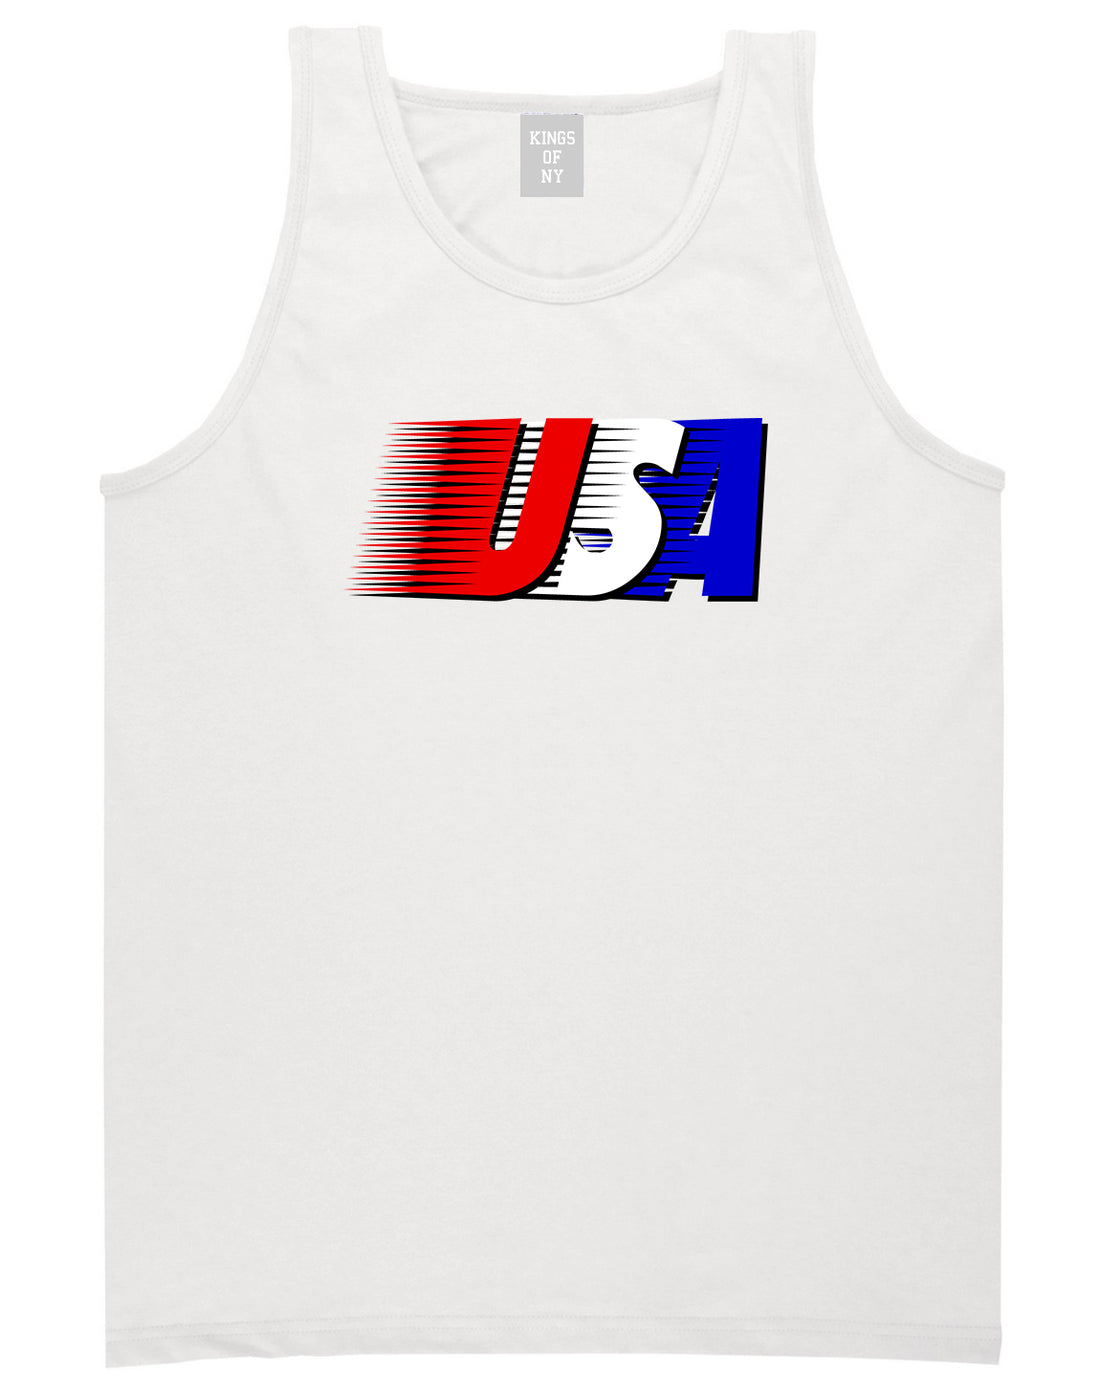 Fourth Of July USA Mens White Tank Top Shirt by KINGS OF NY